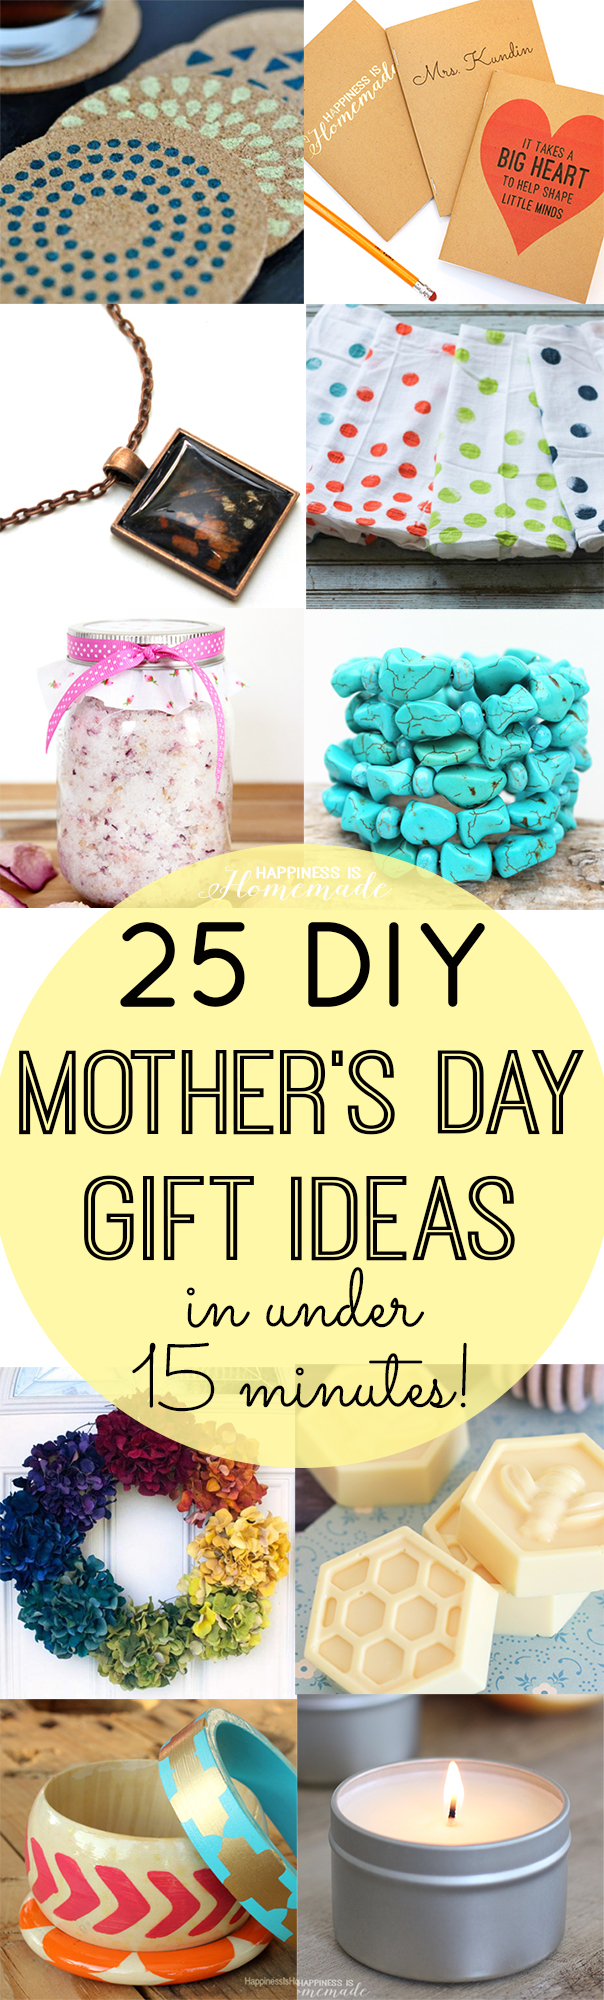 https://www.thecountrychiccottage.net/wp-content/uploads/2016/04/25-DIY-Mothers-Day-Gift-Ideas-in-Under-15-Minutes.jpg